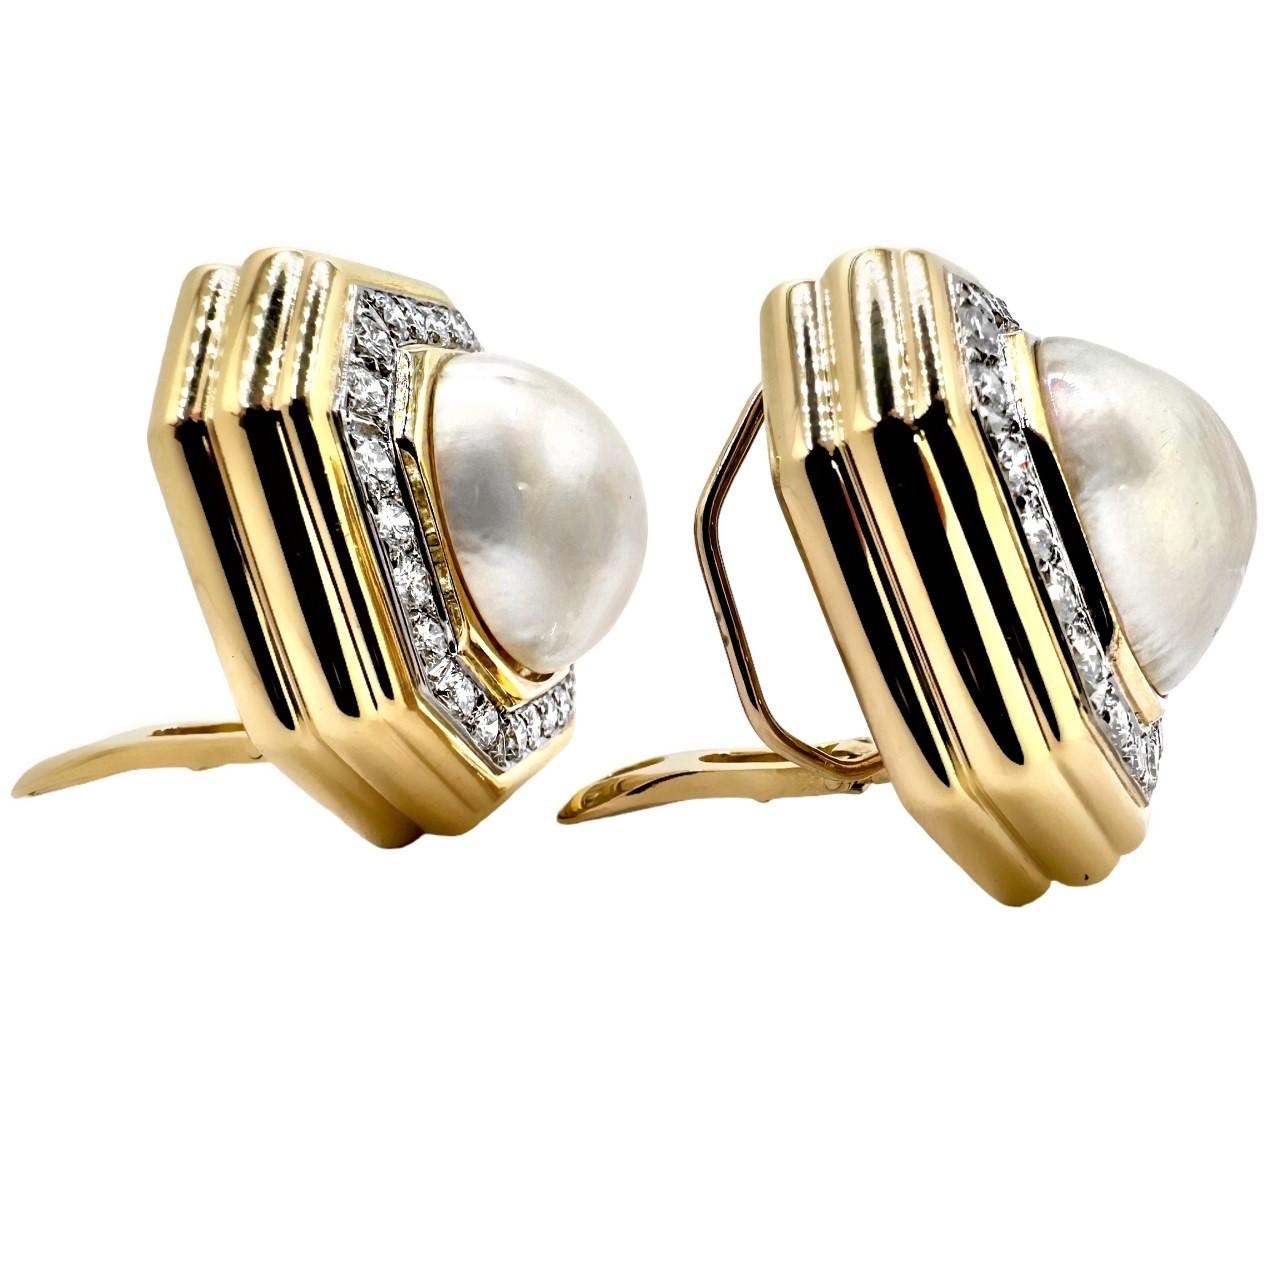 Grand Scale Earrings in Gold, Platinum, Mabe Pearl, & Diamonds by Wander, France In Good Condition For Sale In Palm Beach, FL